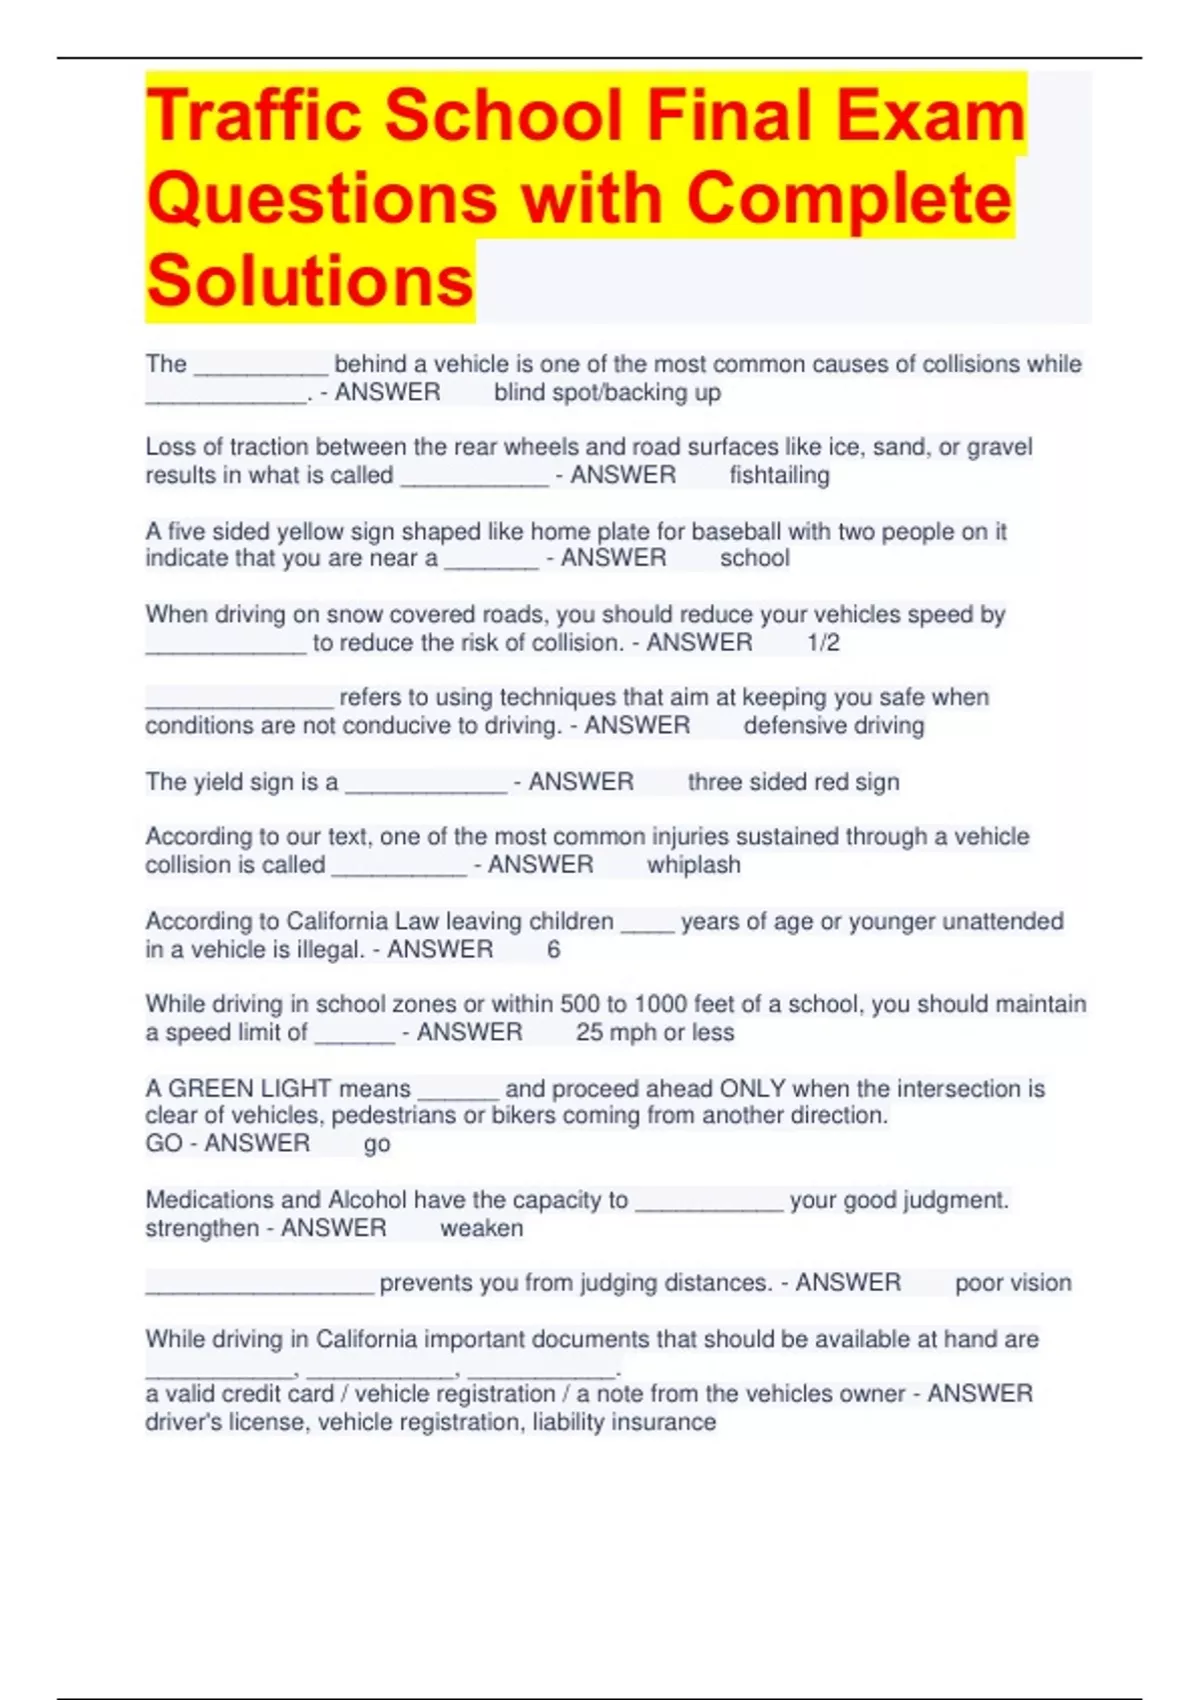 Traffic School Final Exam Questions with Complete Solutions Traffic